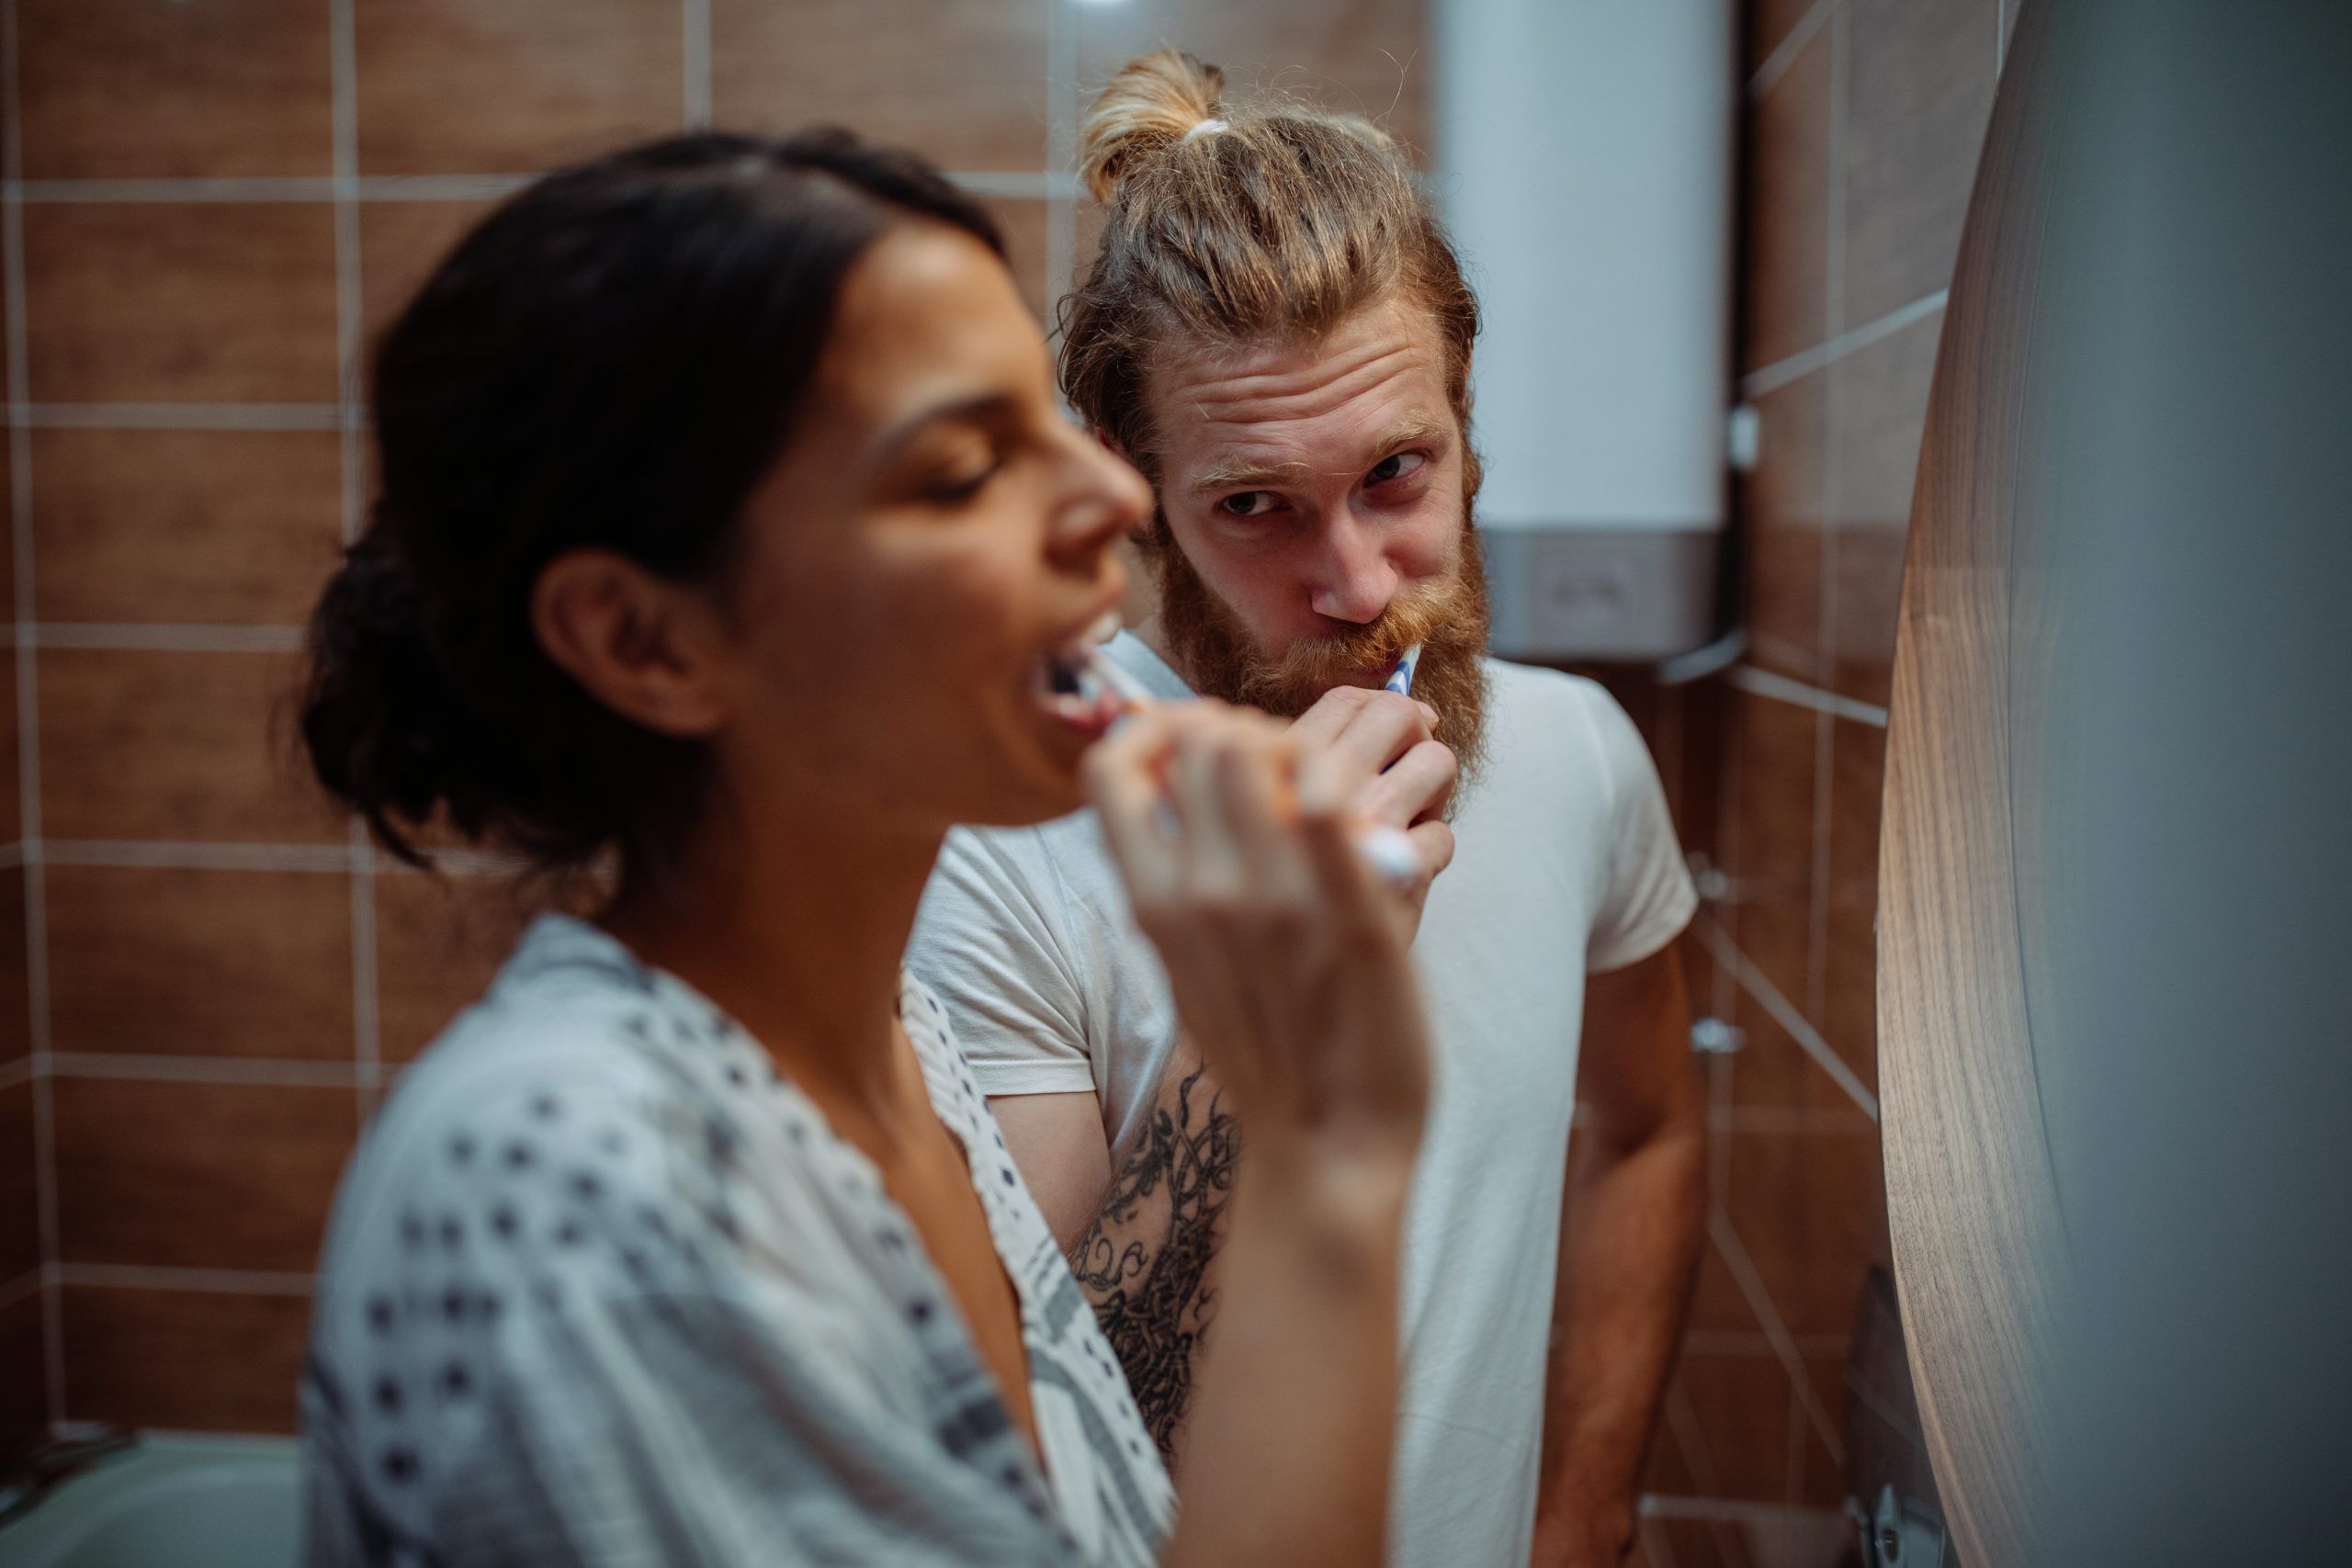 Sharing a toothbrush spreads germs. Duh. Stock/Getty